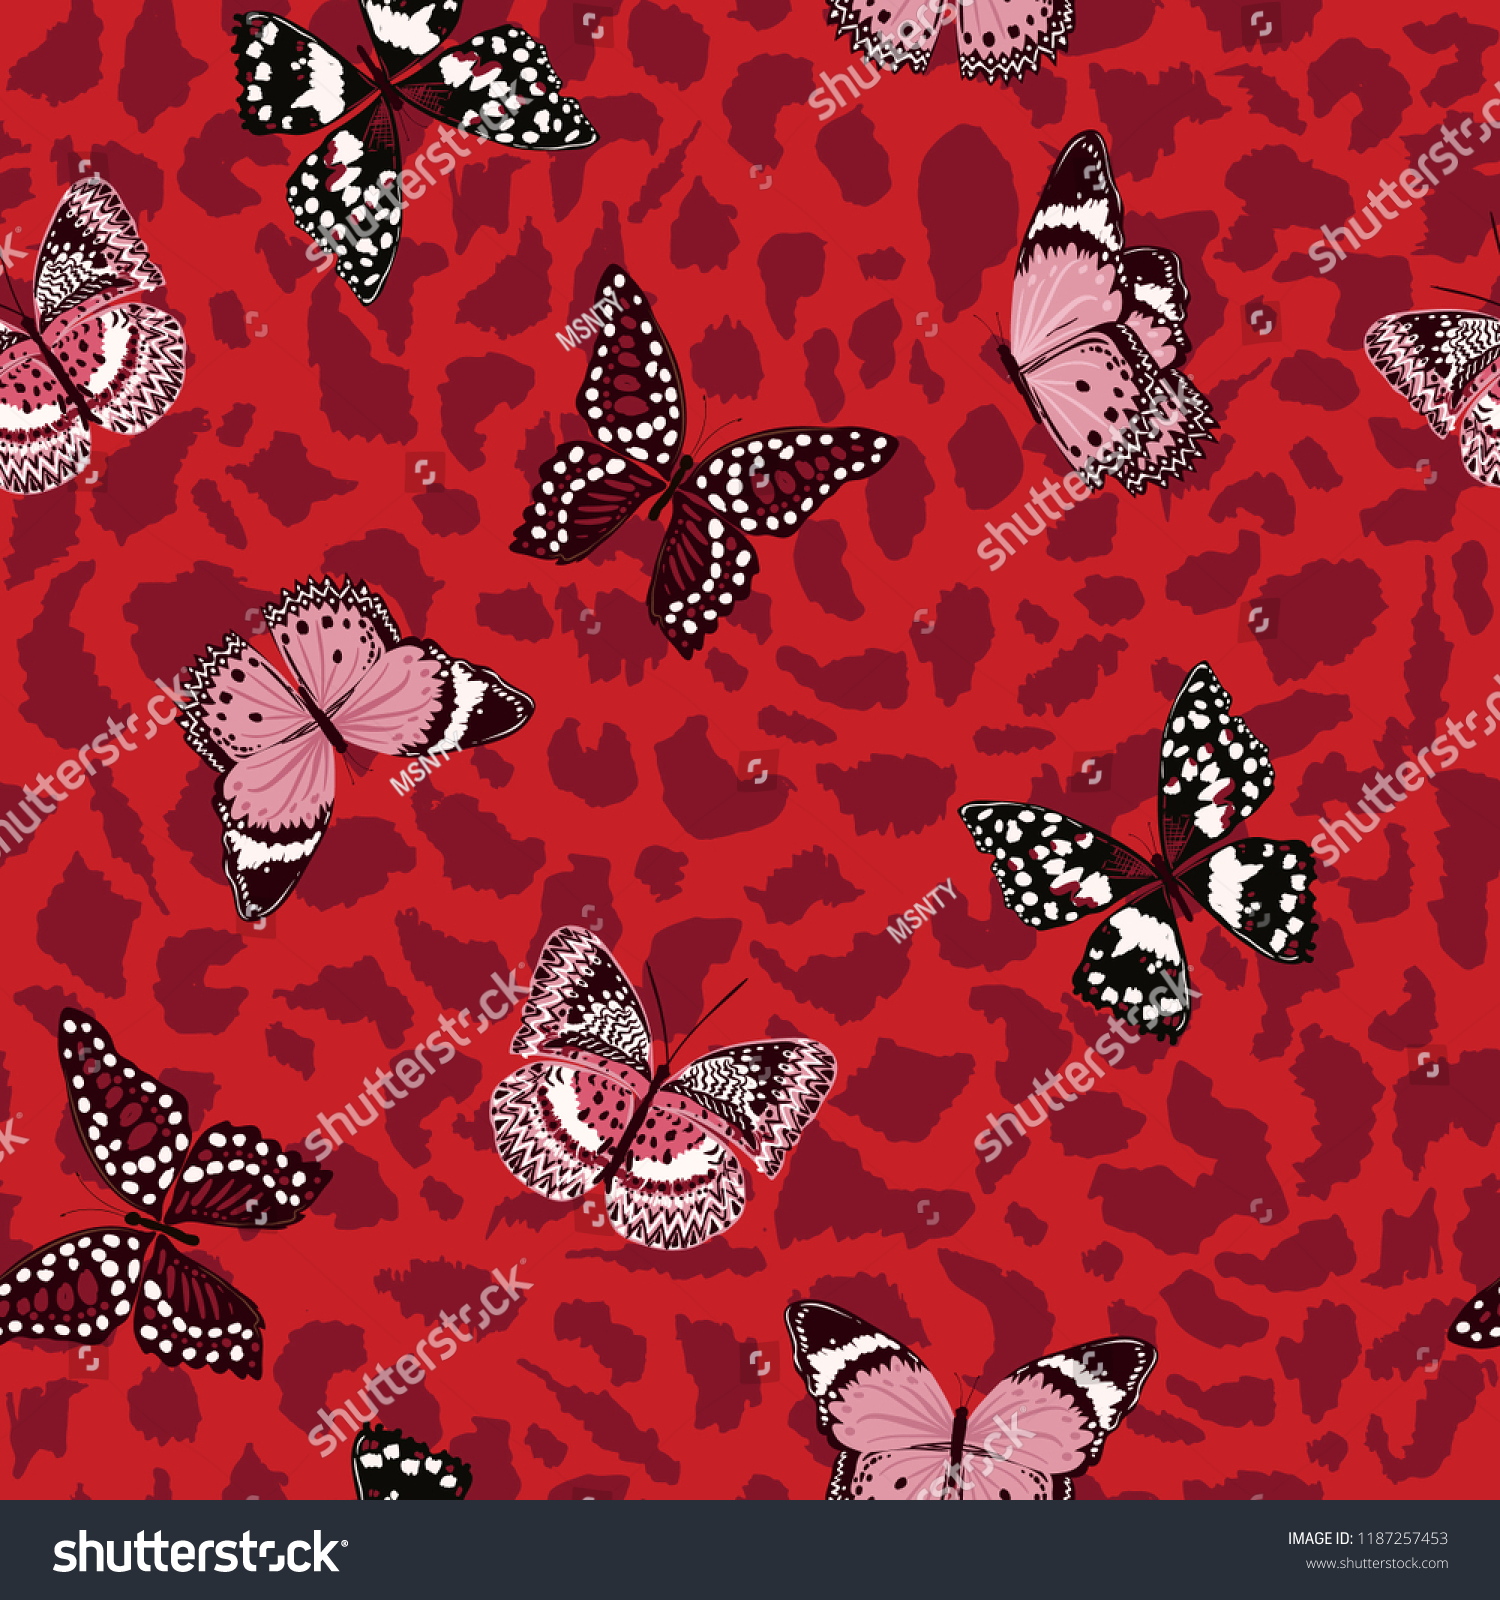 Butterflies Flying On Monotone Red Animal Stock Vector Royalty